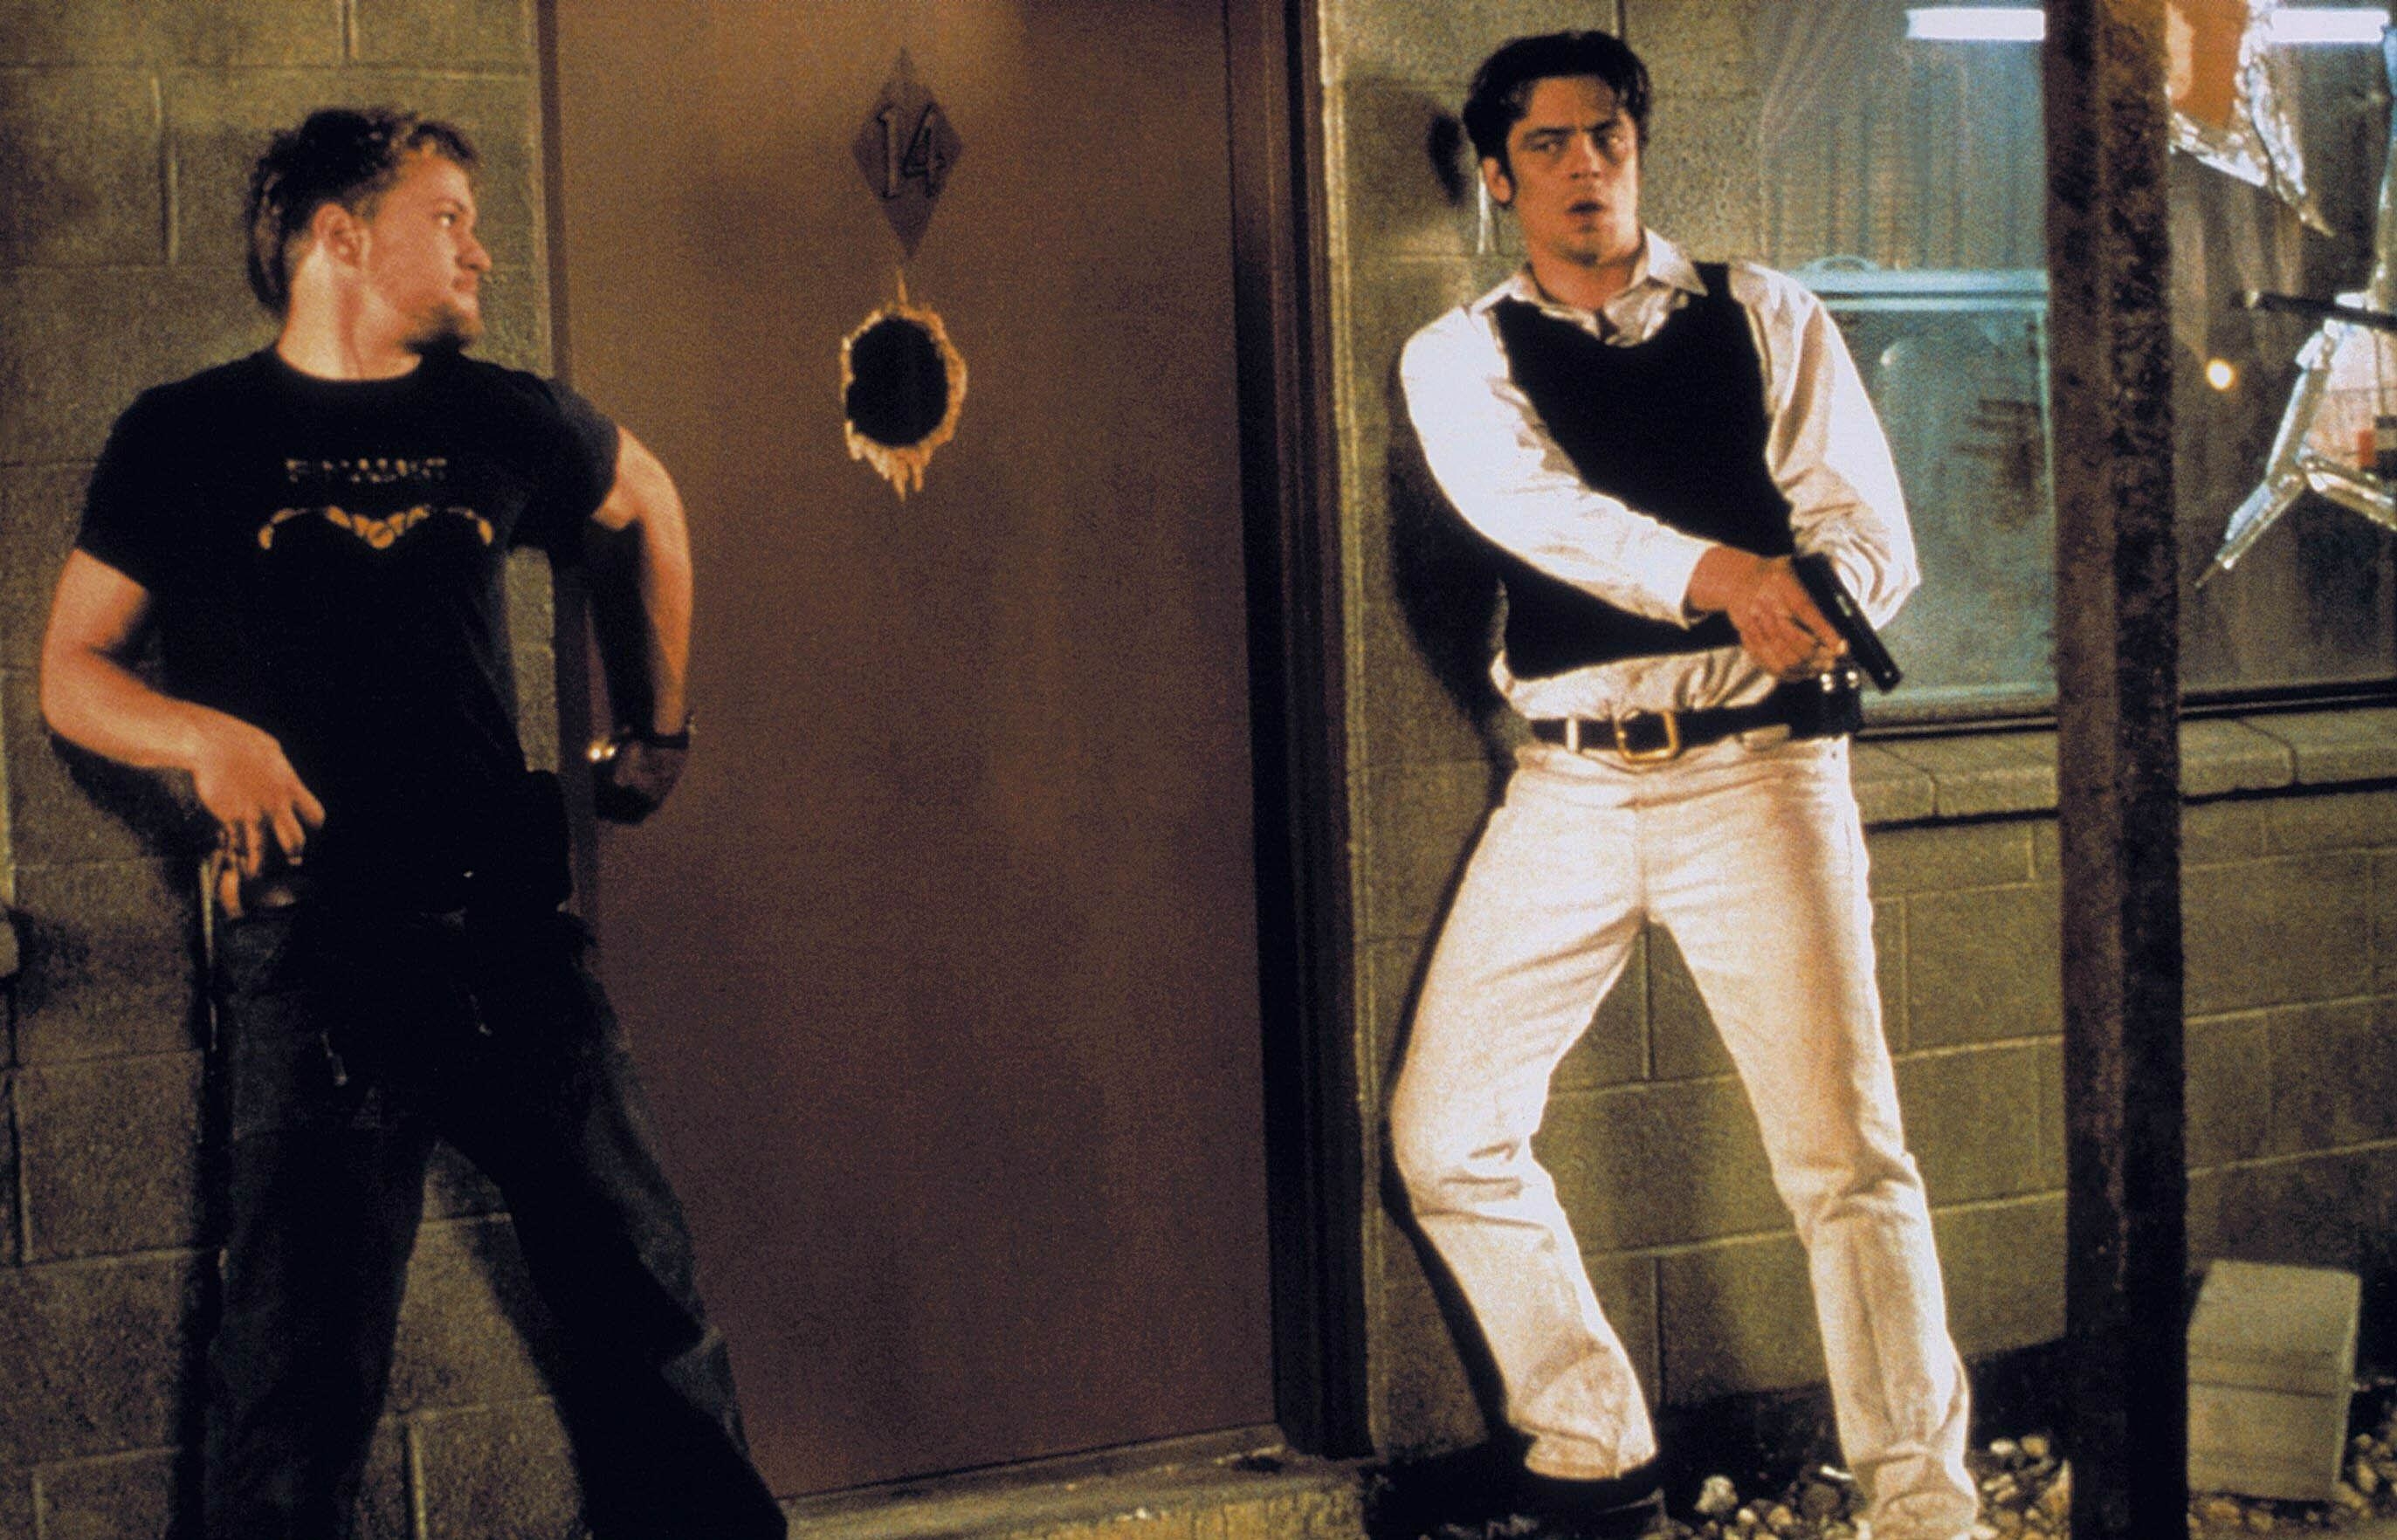 Two tense young men stand next to a motel room door with a gaping bullet hole in its center